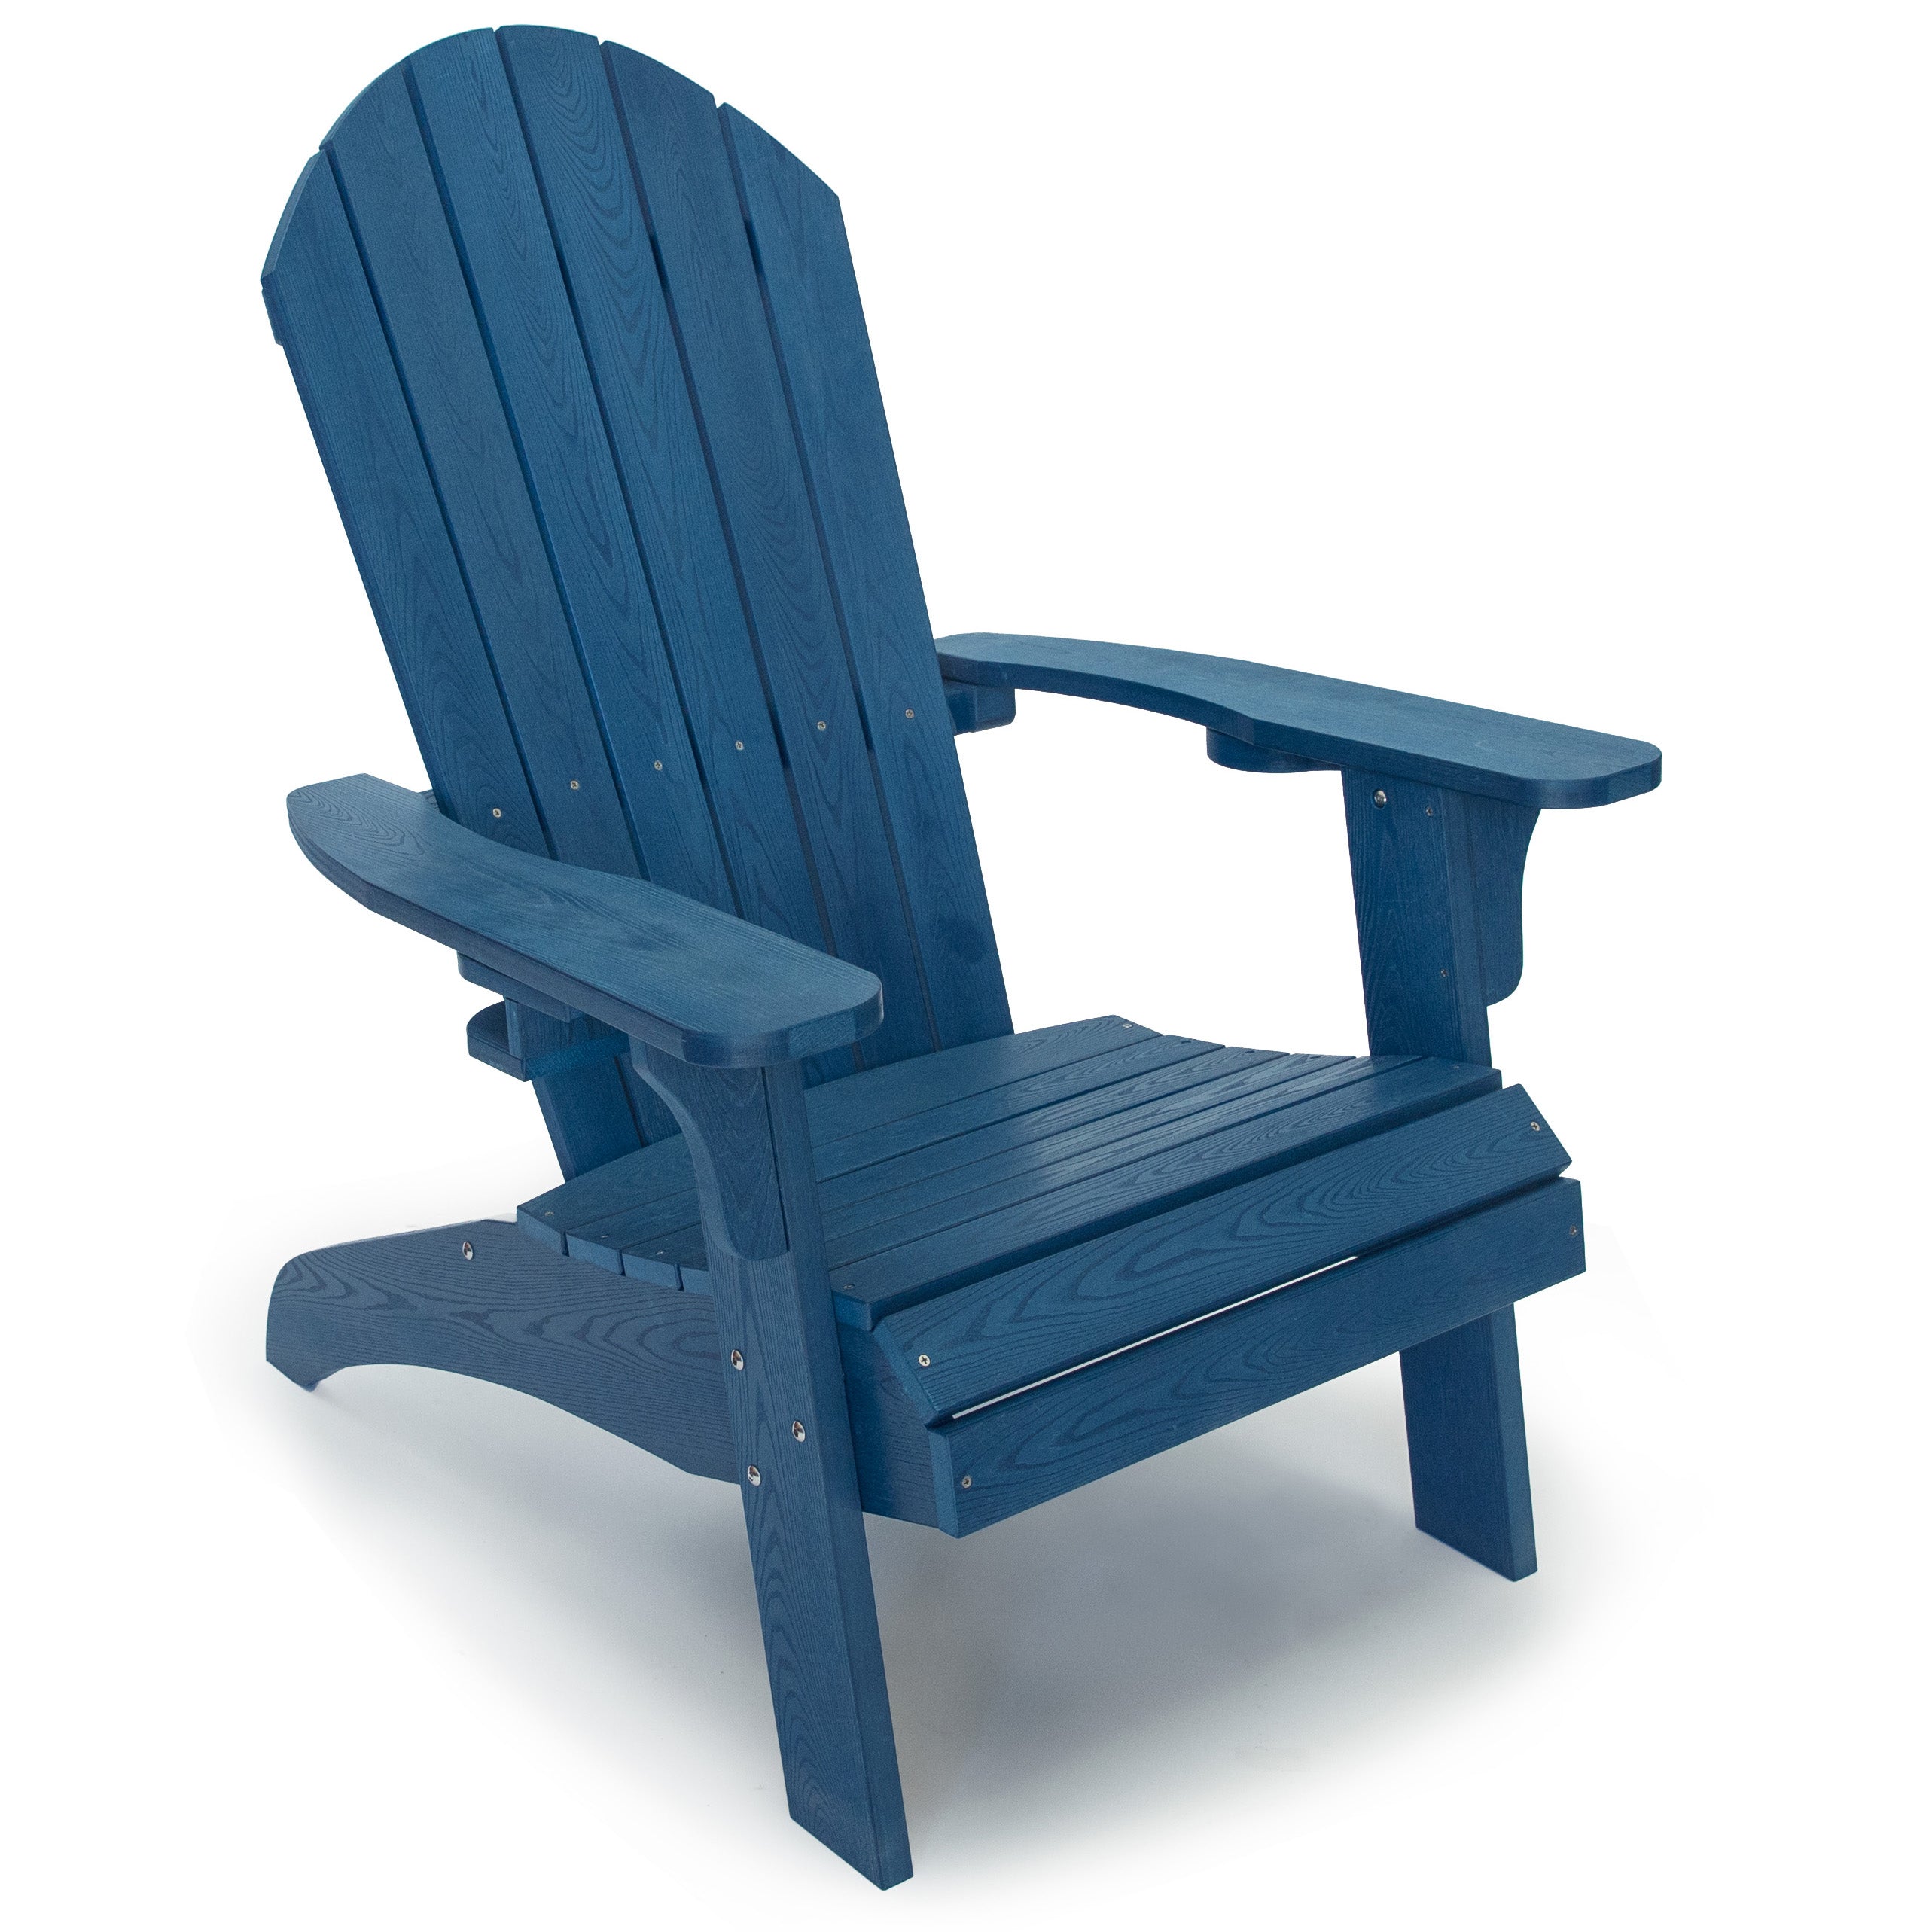 LuXeo Westwood All Weather Outdoor Patio Adirondack Chair (3-Piece)